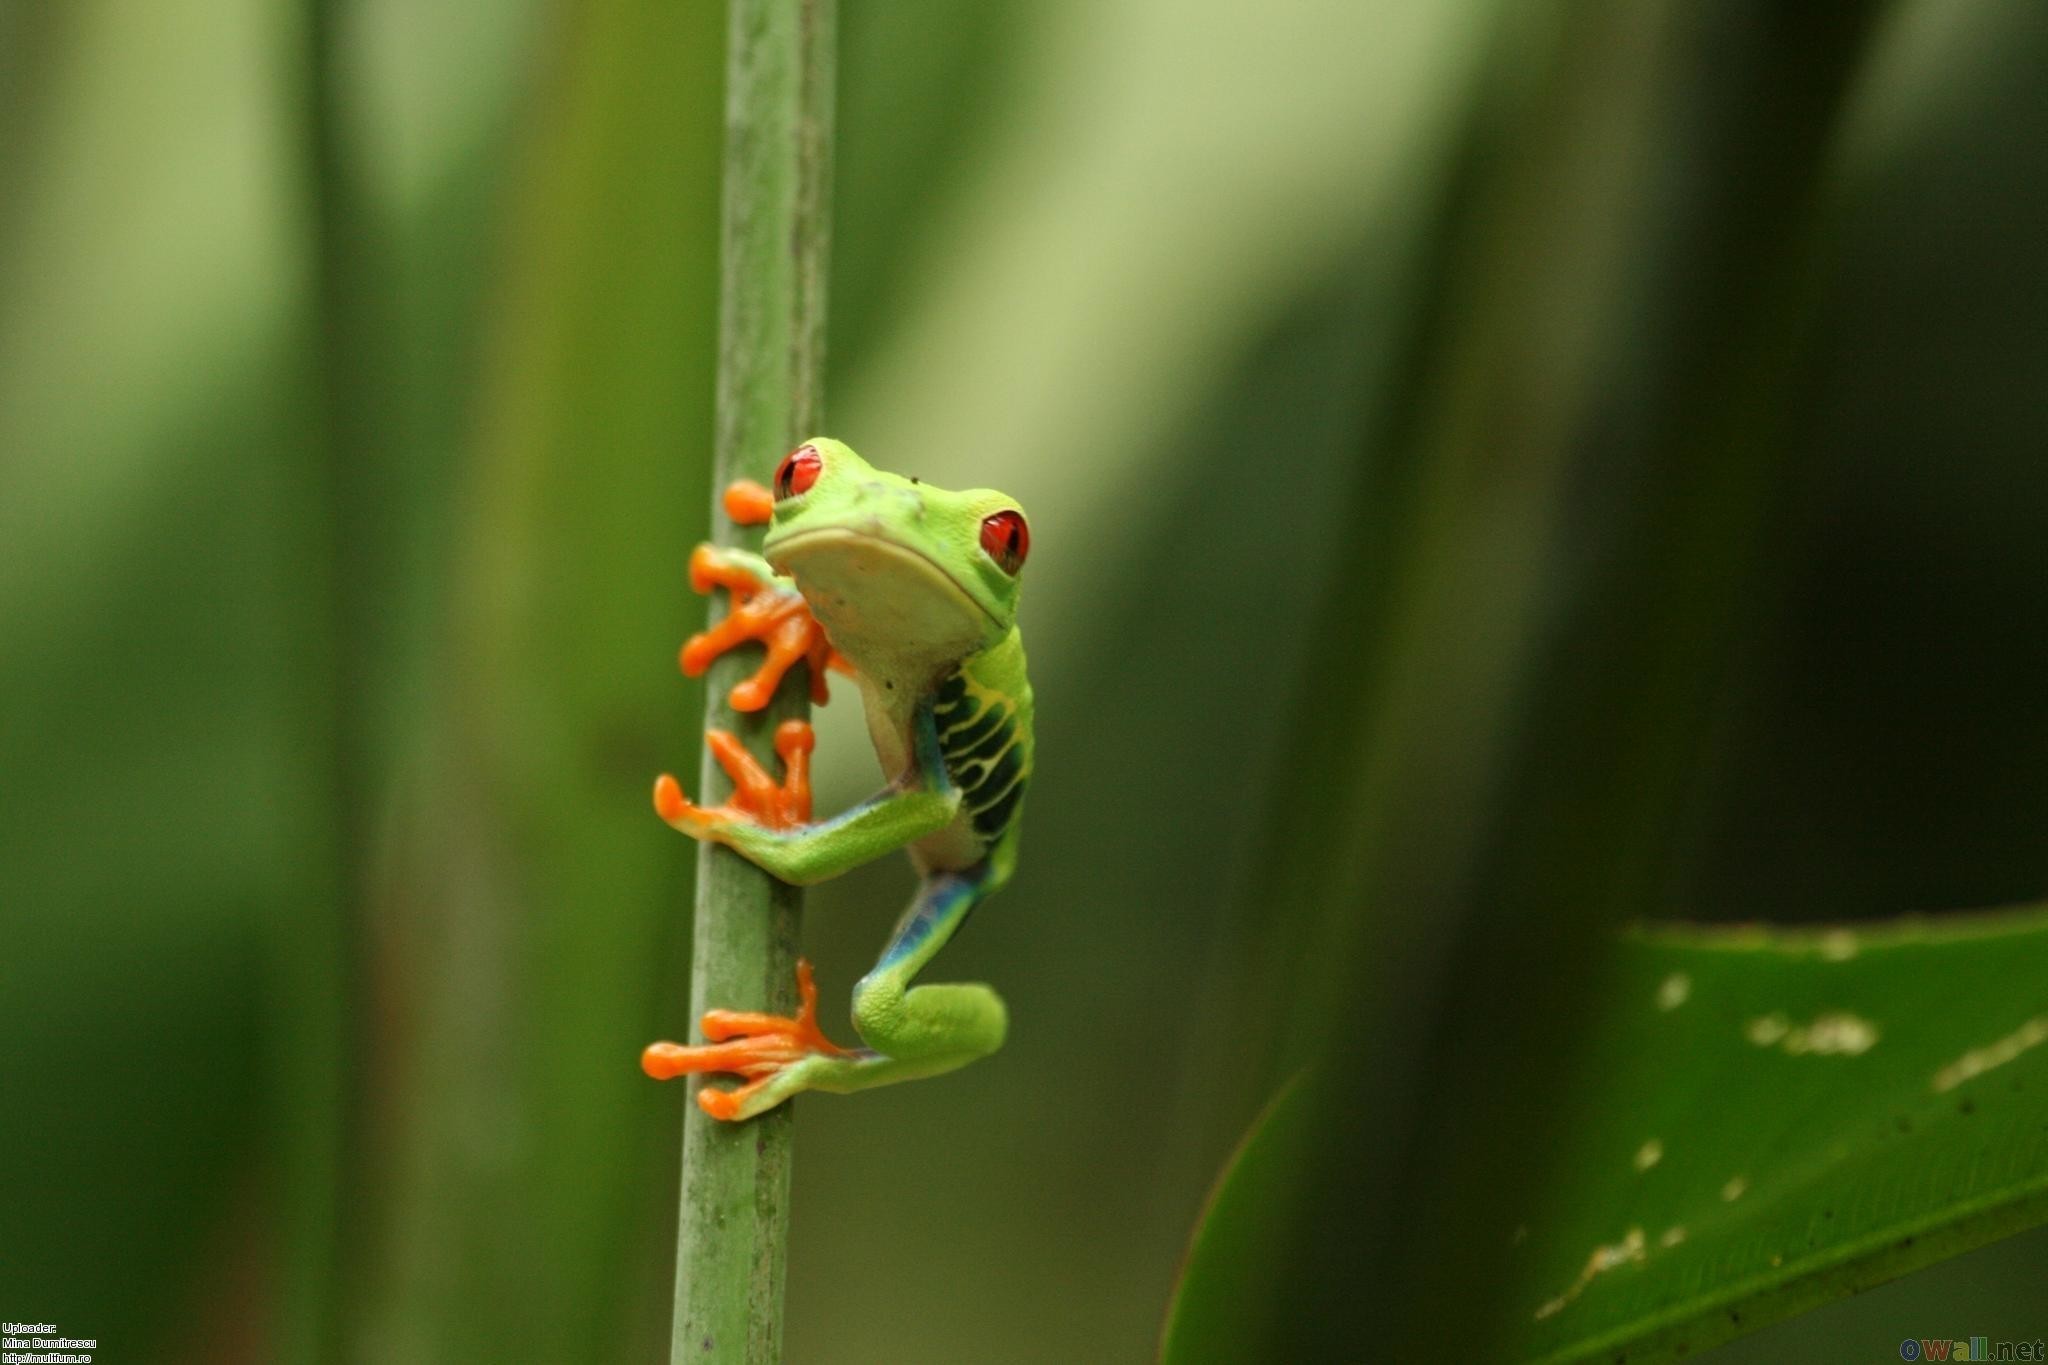 Little Frog Line Style Green Wallpaper Background Wallpaper Image For Free  Download  Pngtree